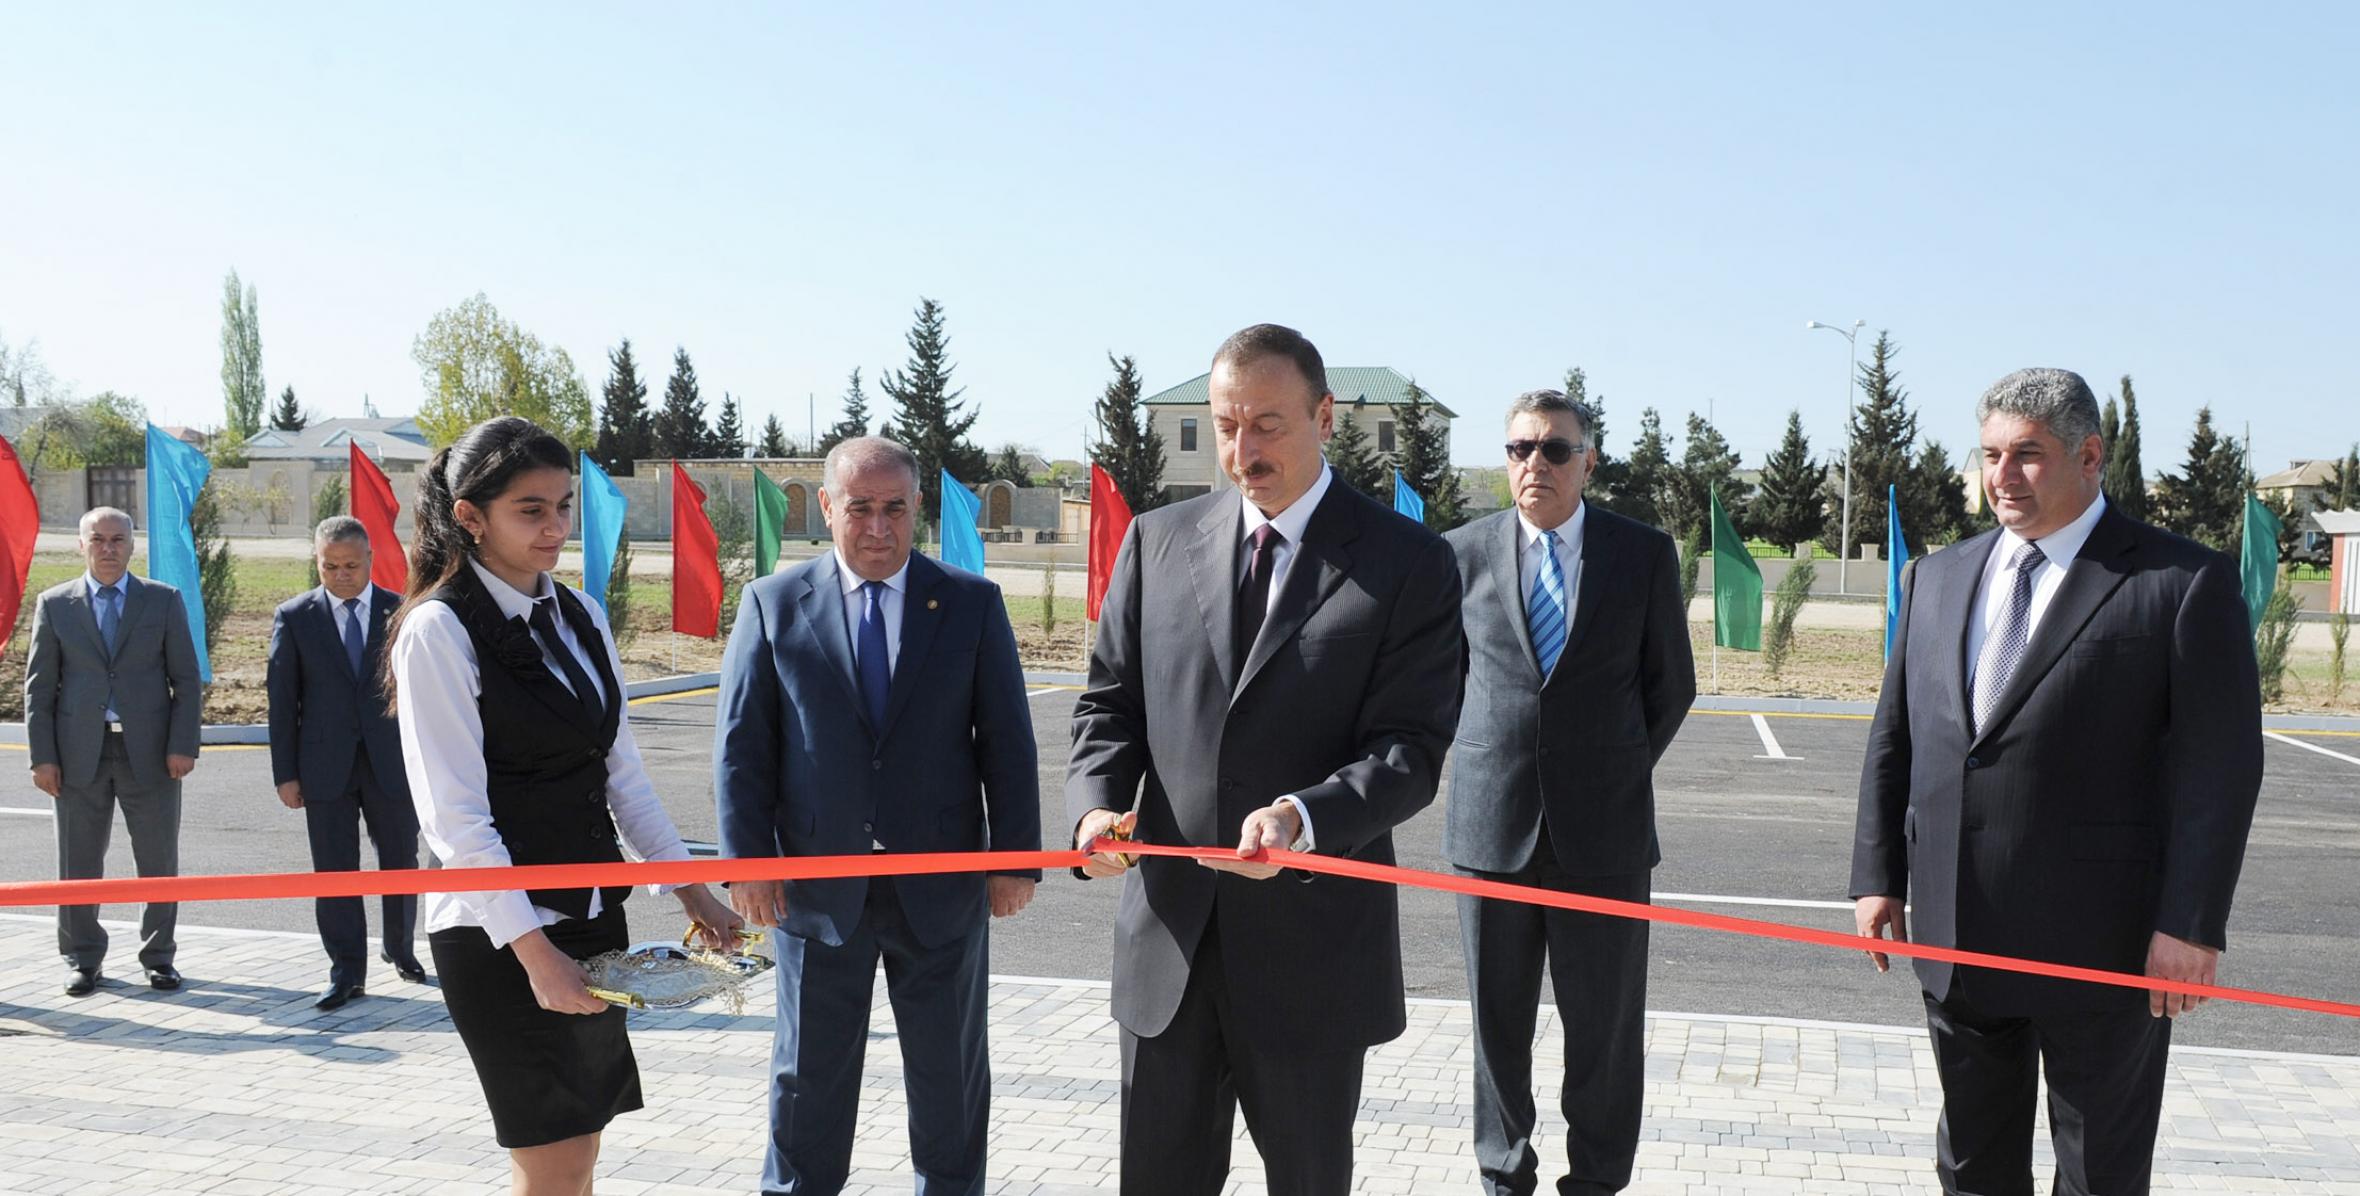 Ilham Aliyev attended the opening of the Gobustan sports center